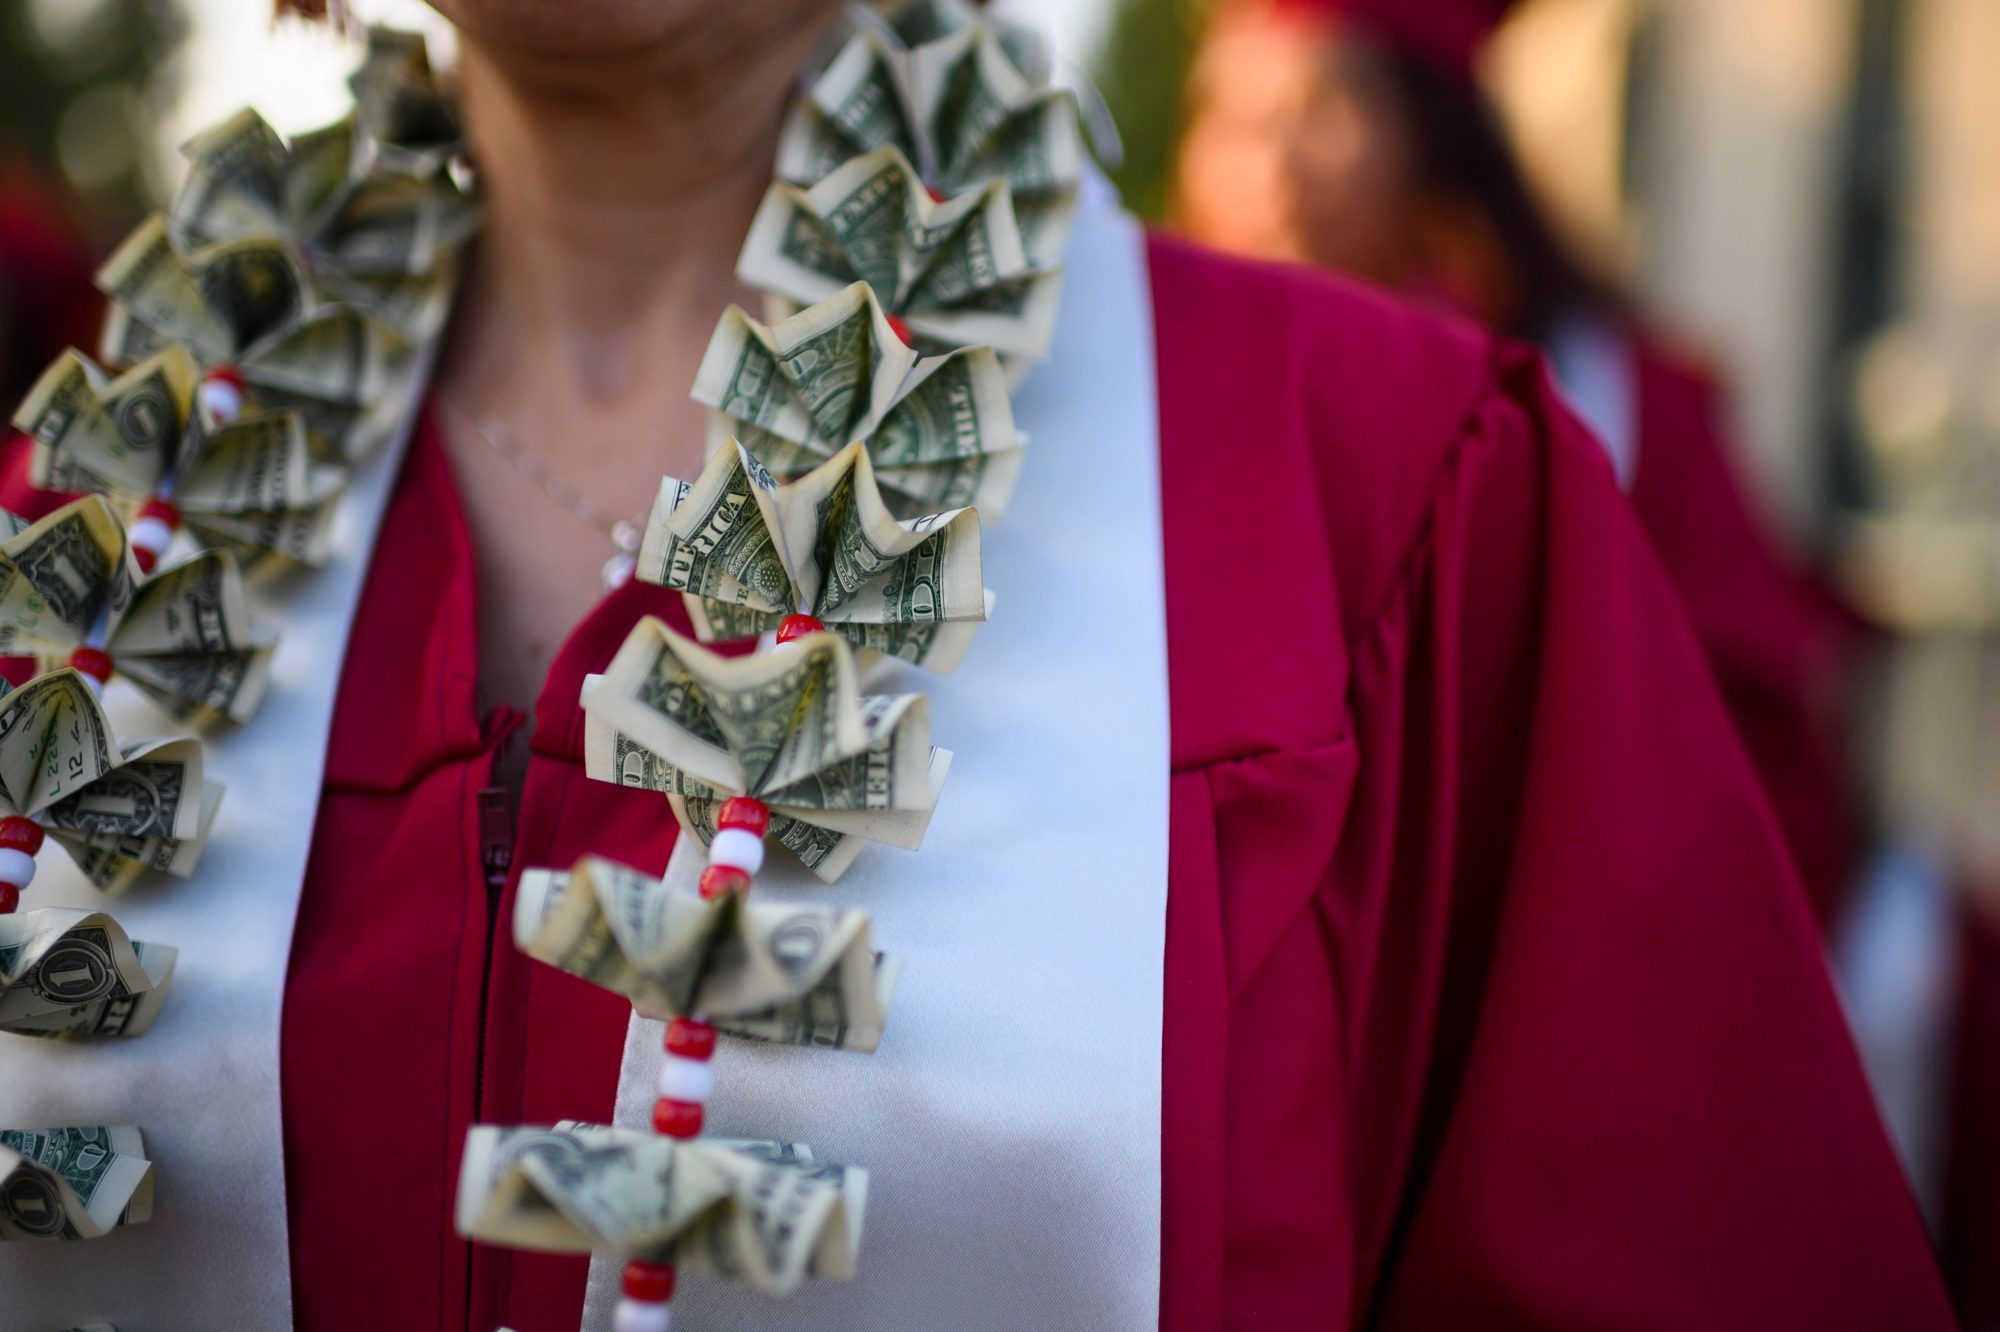 A graduating student wears a money lei, a necklace made of US dollar bills, at the Pasadena City College graduation ceremony, June 14, 2019, in Pasadena, California. - With 45 million borrowers owing $1.5 trillion, the student debt crisis in the United States has exploded in recent years and has become a key electoral issue in the run-up to the 2020 presidential elections. "Somebody who graduates from a public university this year is expected to have over $35,000 in student loan debt on average," said Cody Hounanian, program director of Student Debt Crisis, a California NGO that assists students and is fighting for reforms.